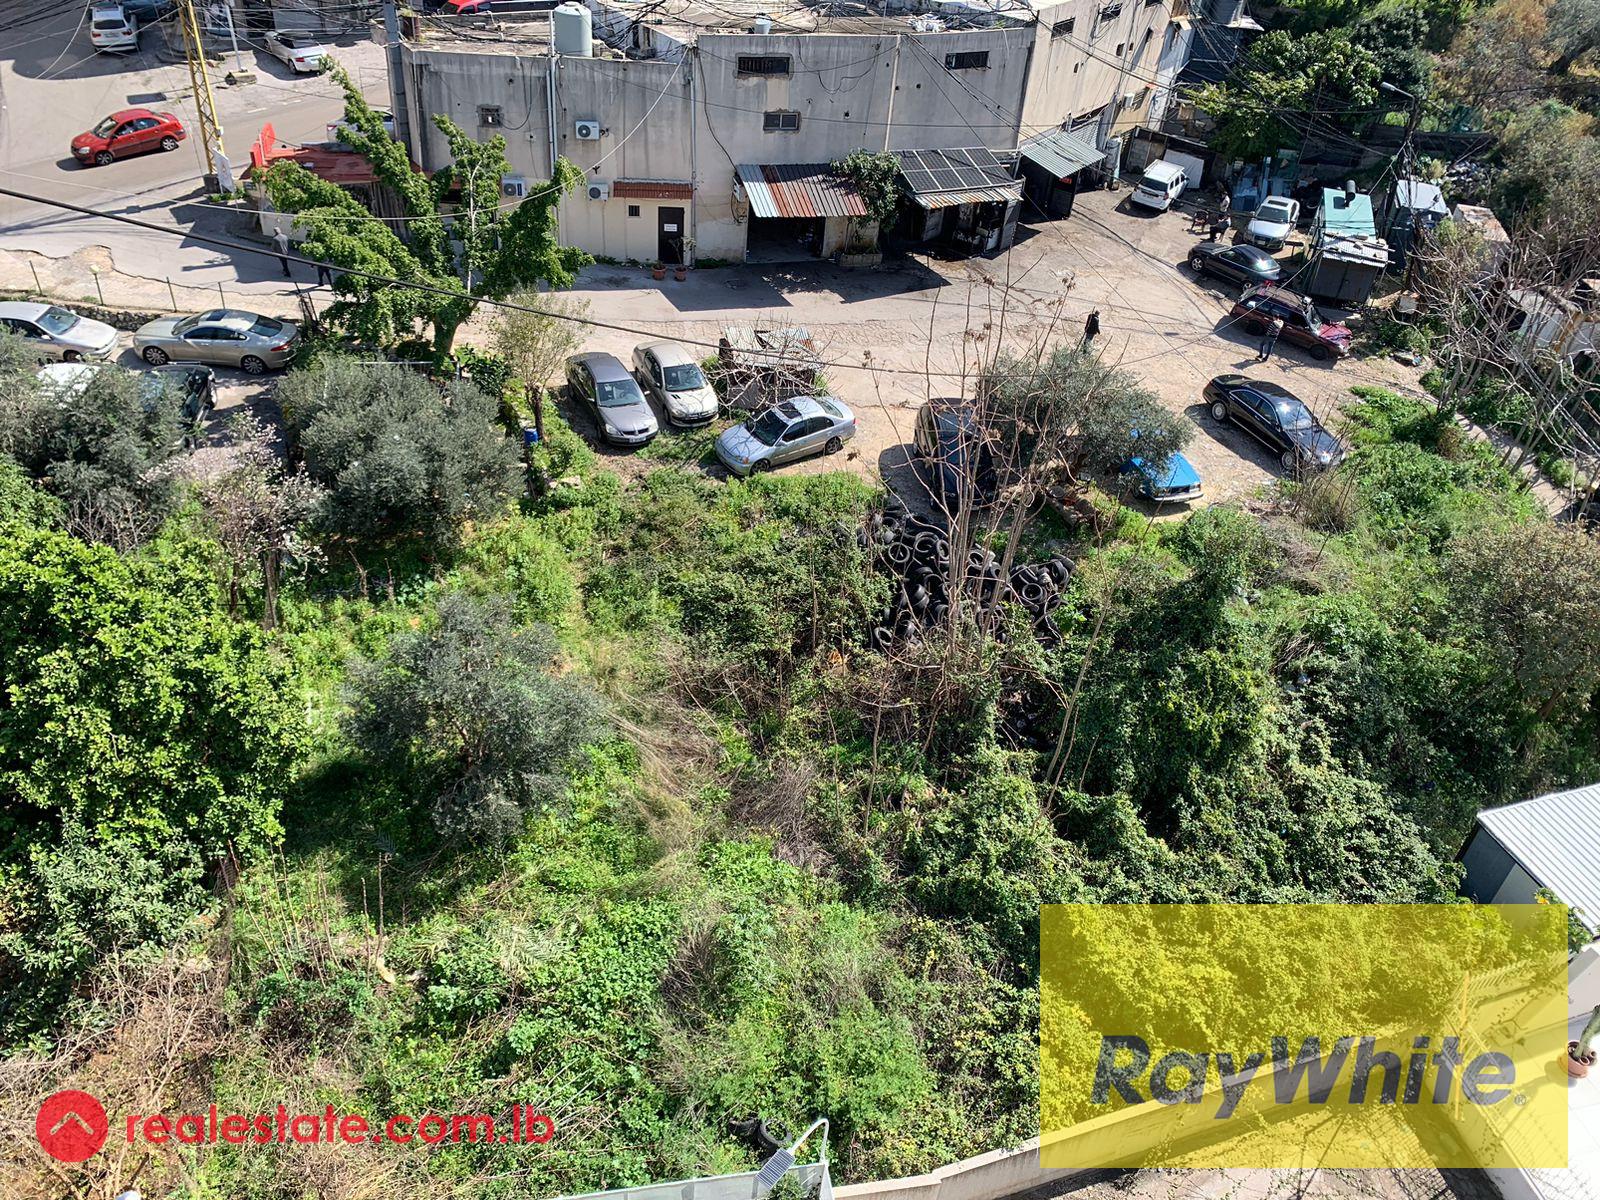 Hot Deal Land For Sale in Zouk Mosbeh